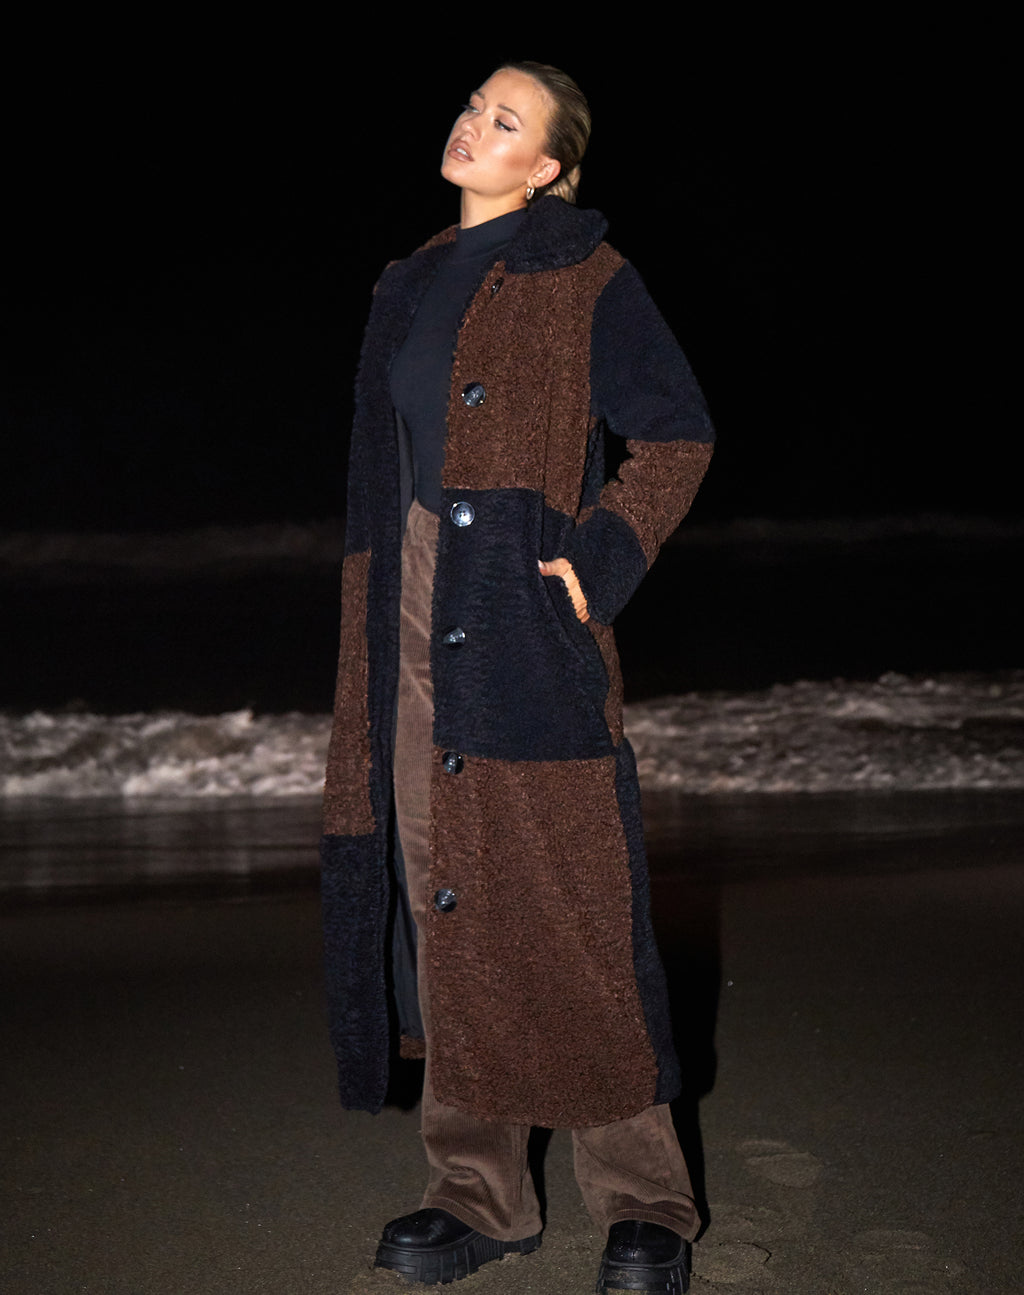 Humus Teddy Coat in Panelled Chocolate and Black